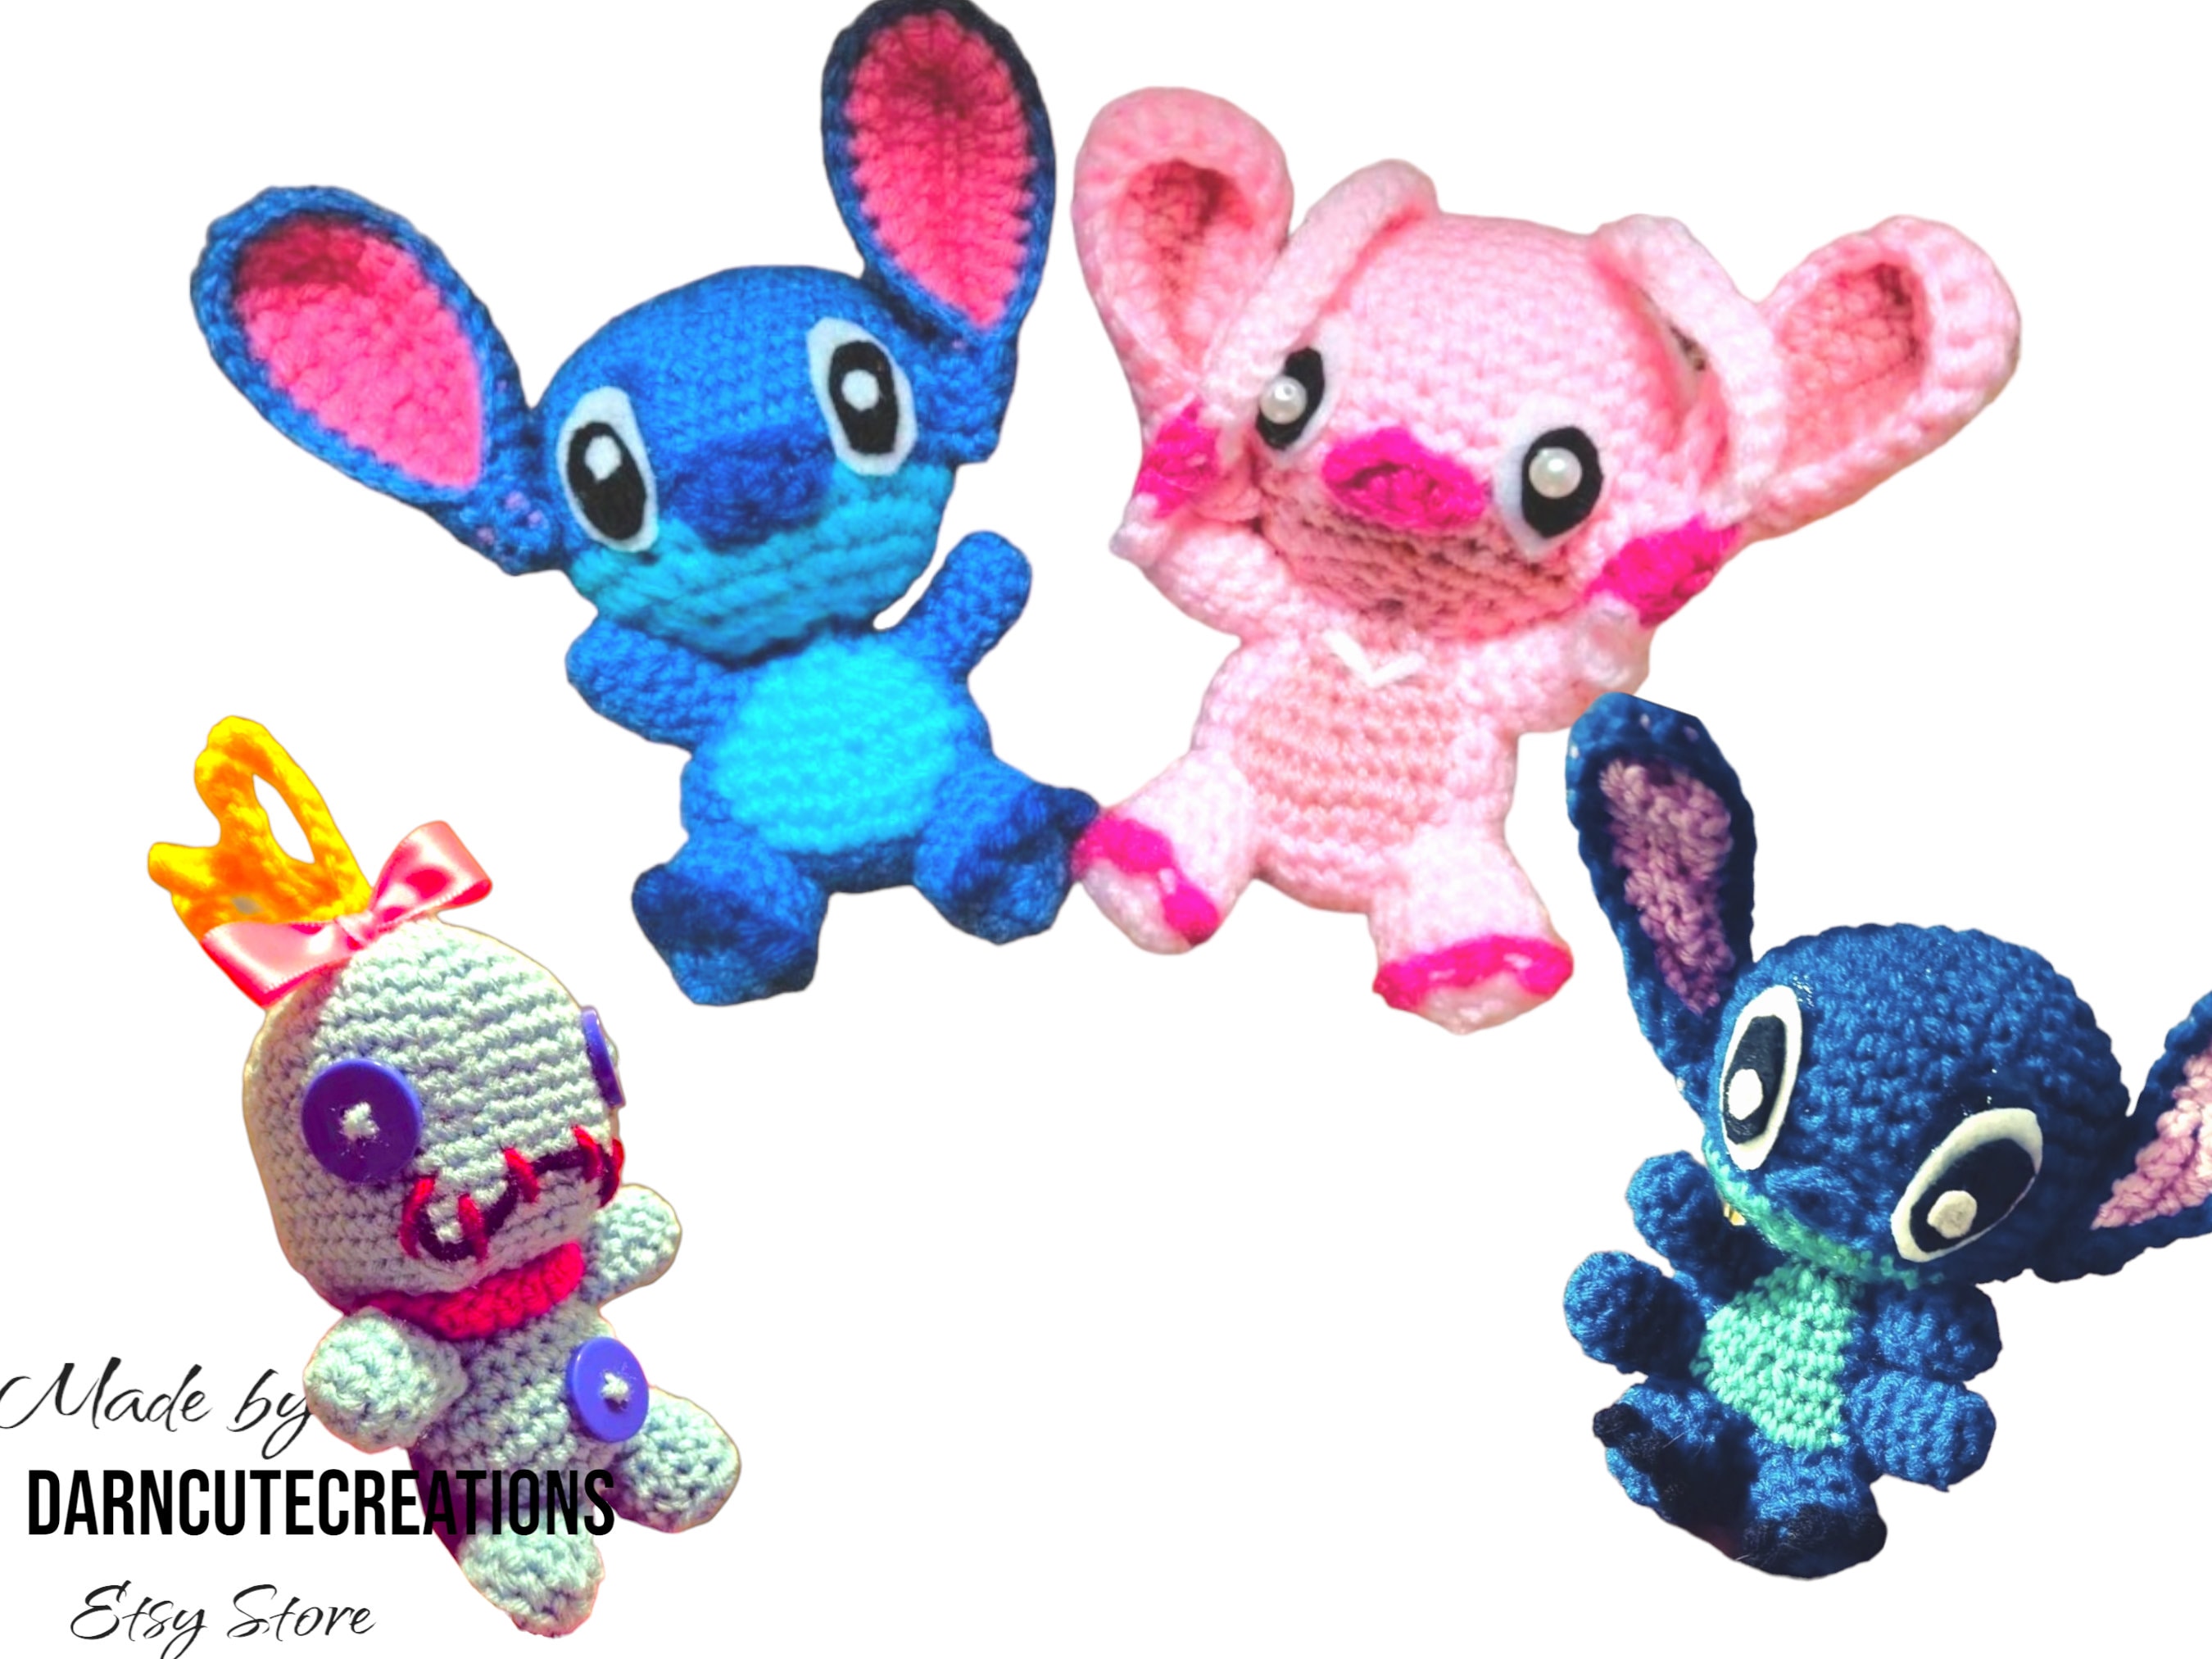 Stitch, Angel and Leroy keychain collection 10cm - Marketplace Plush 2020